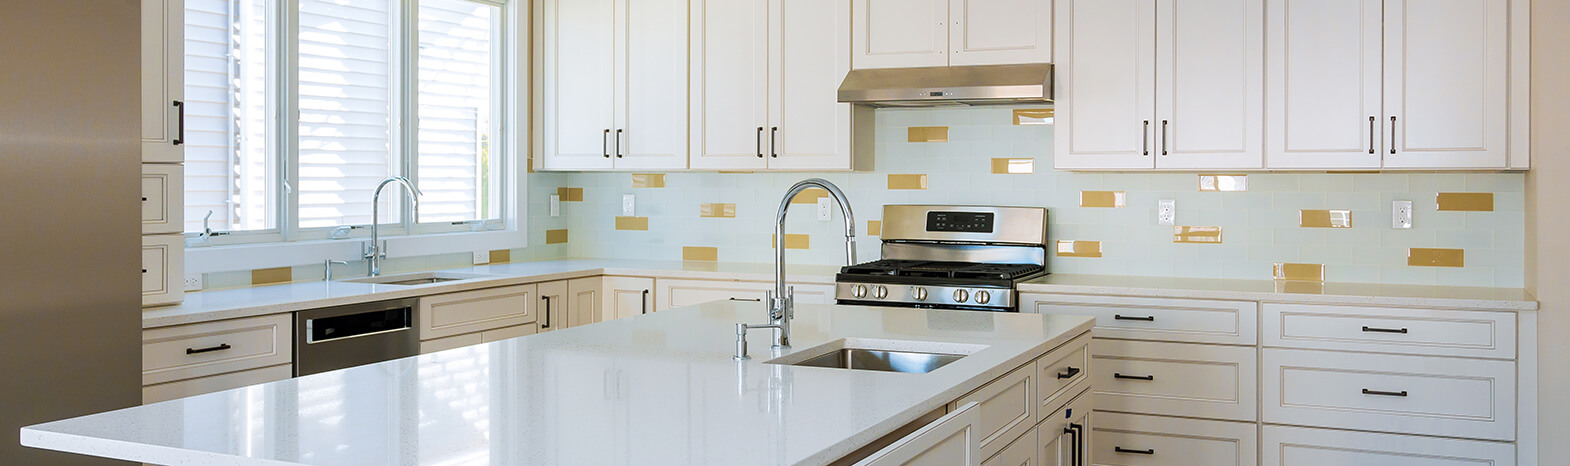 Greenfield General Contractor, Home Remodeling Contractor and Kitchen Remodeling Contractor